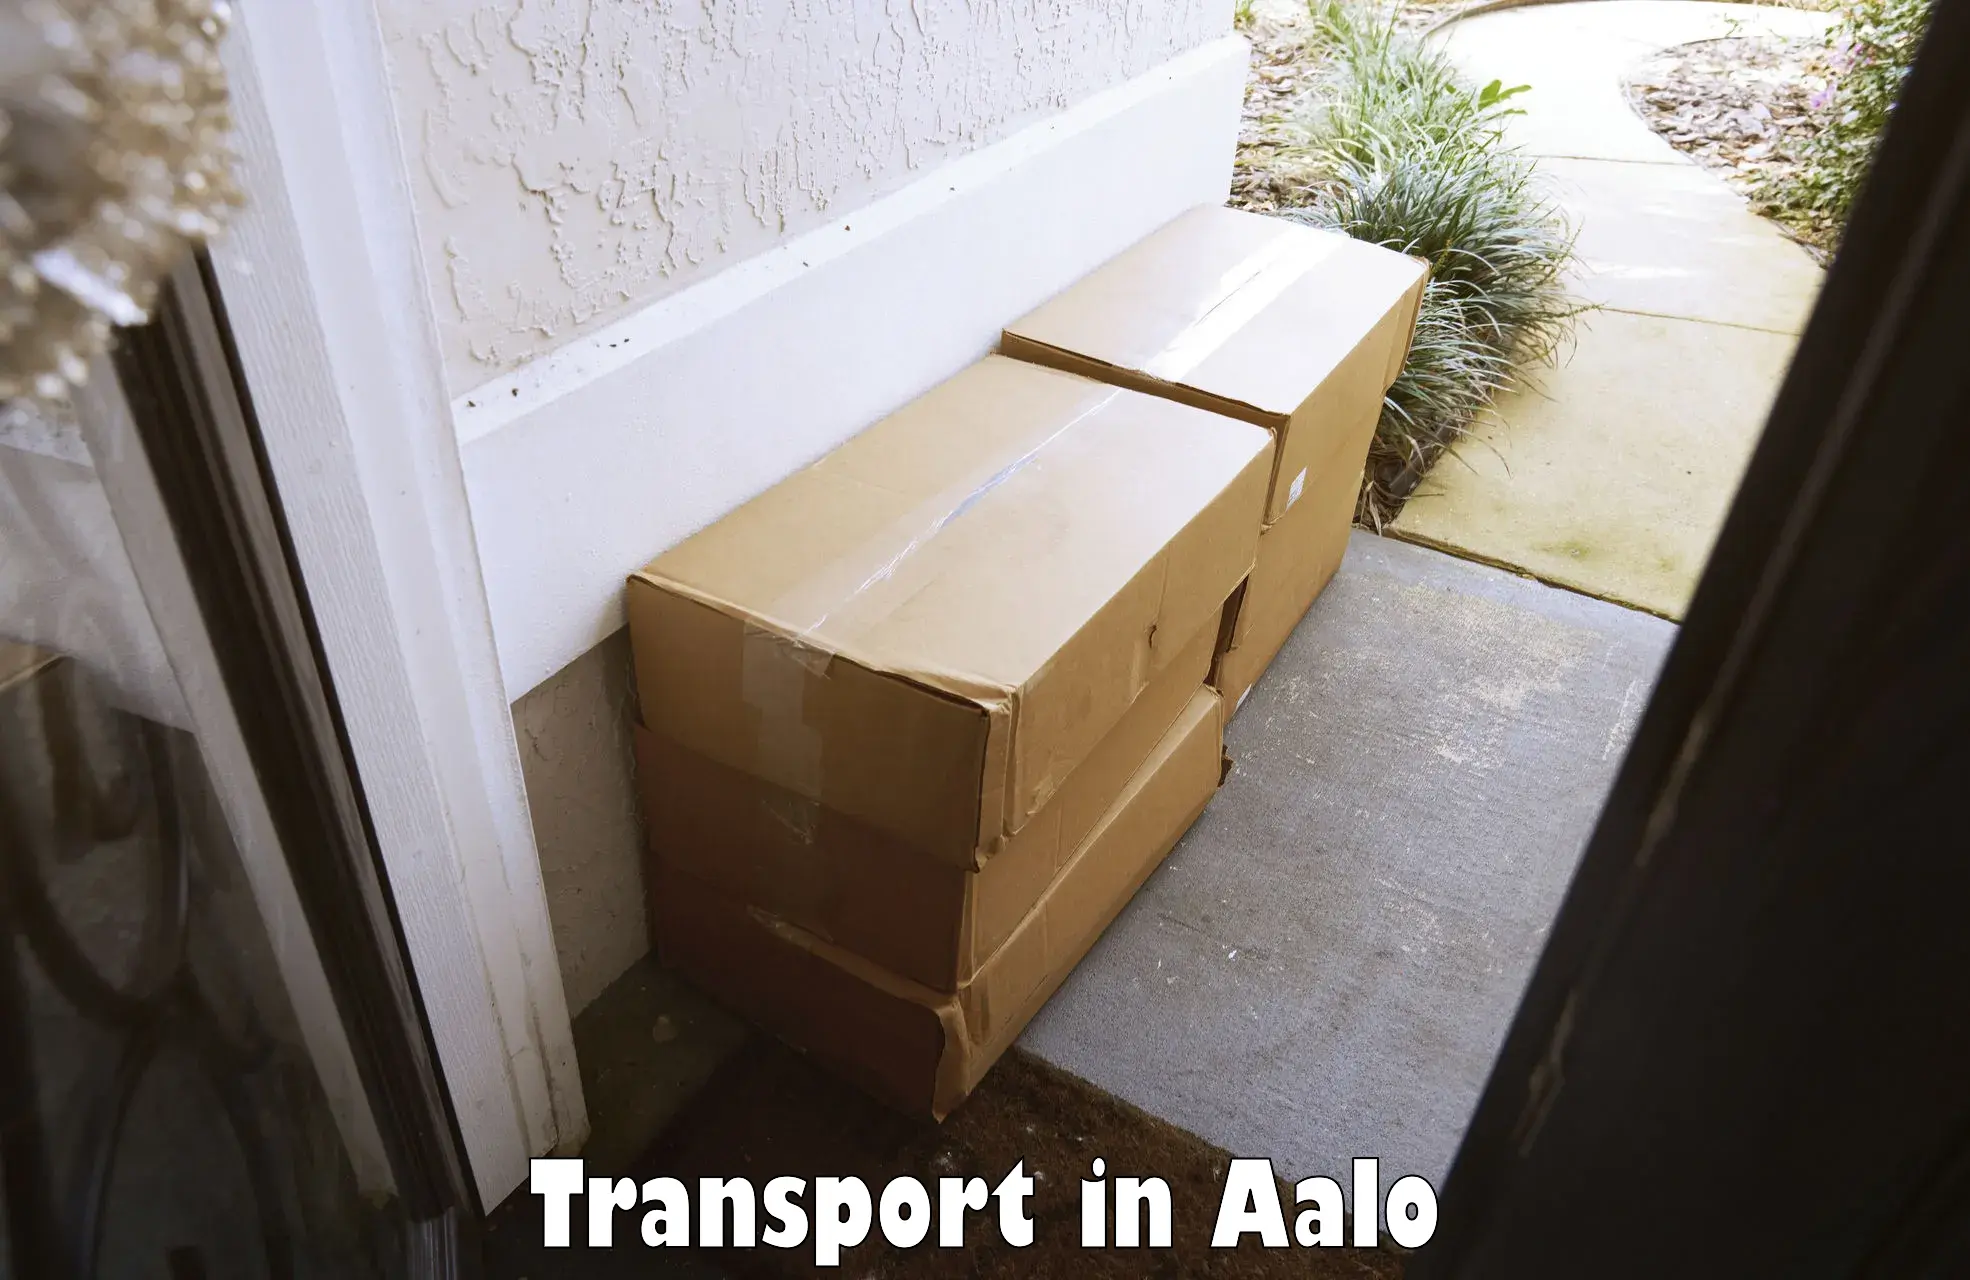 Pick up transport service in Aalo